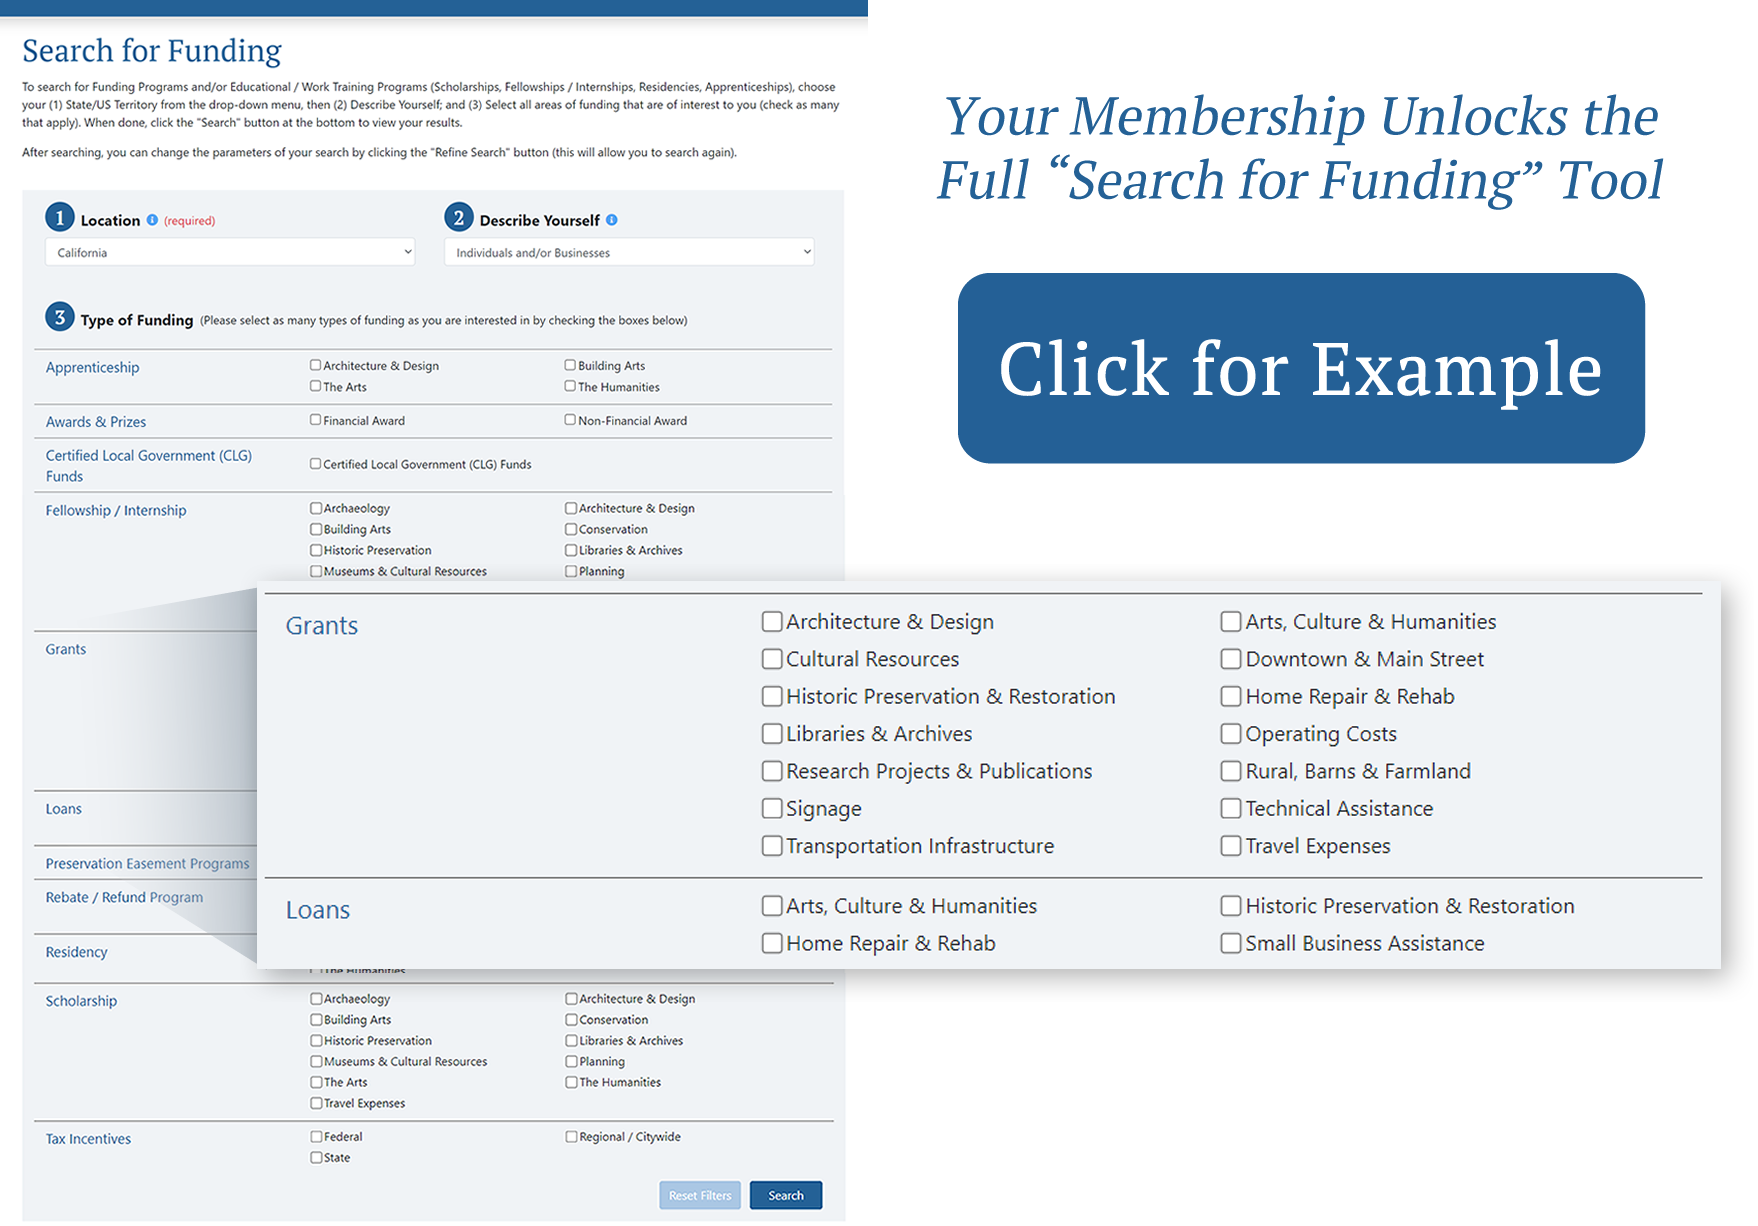 Preview of the 'Search for Funding Sources' tool, available with your membership to HistoricFunding.com.